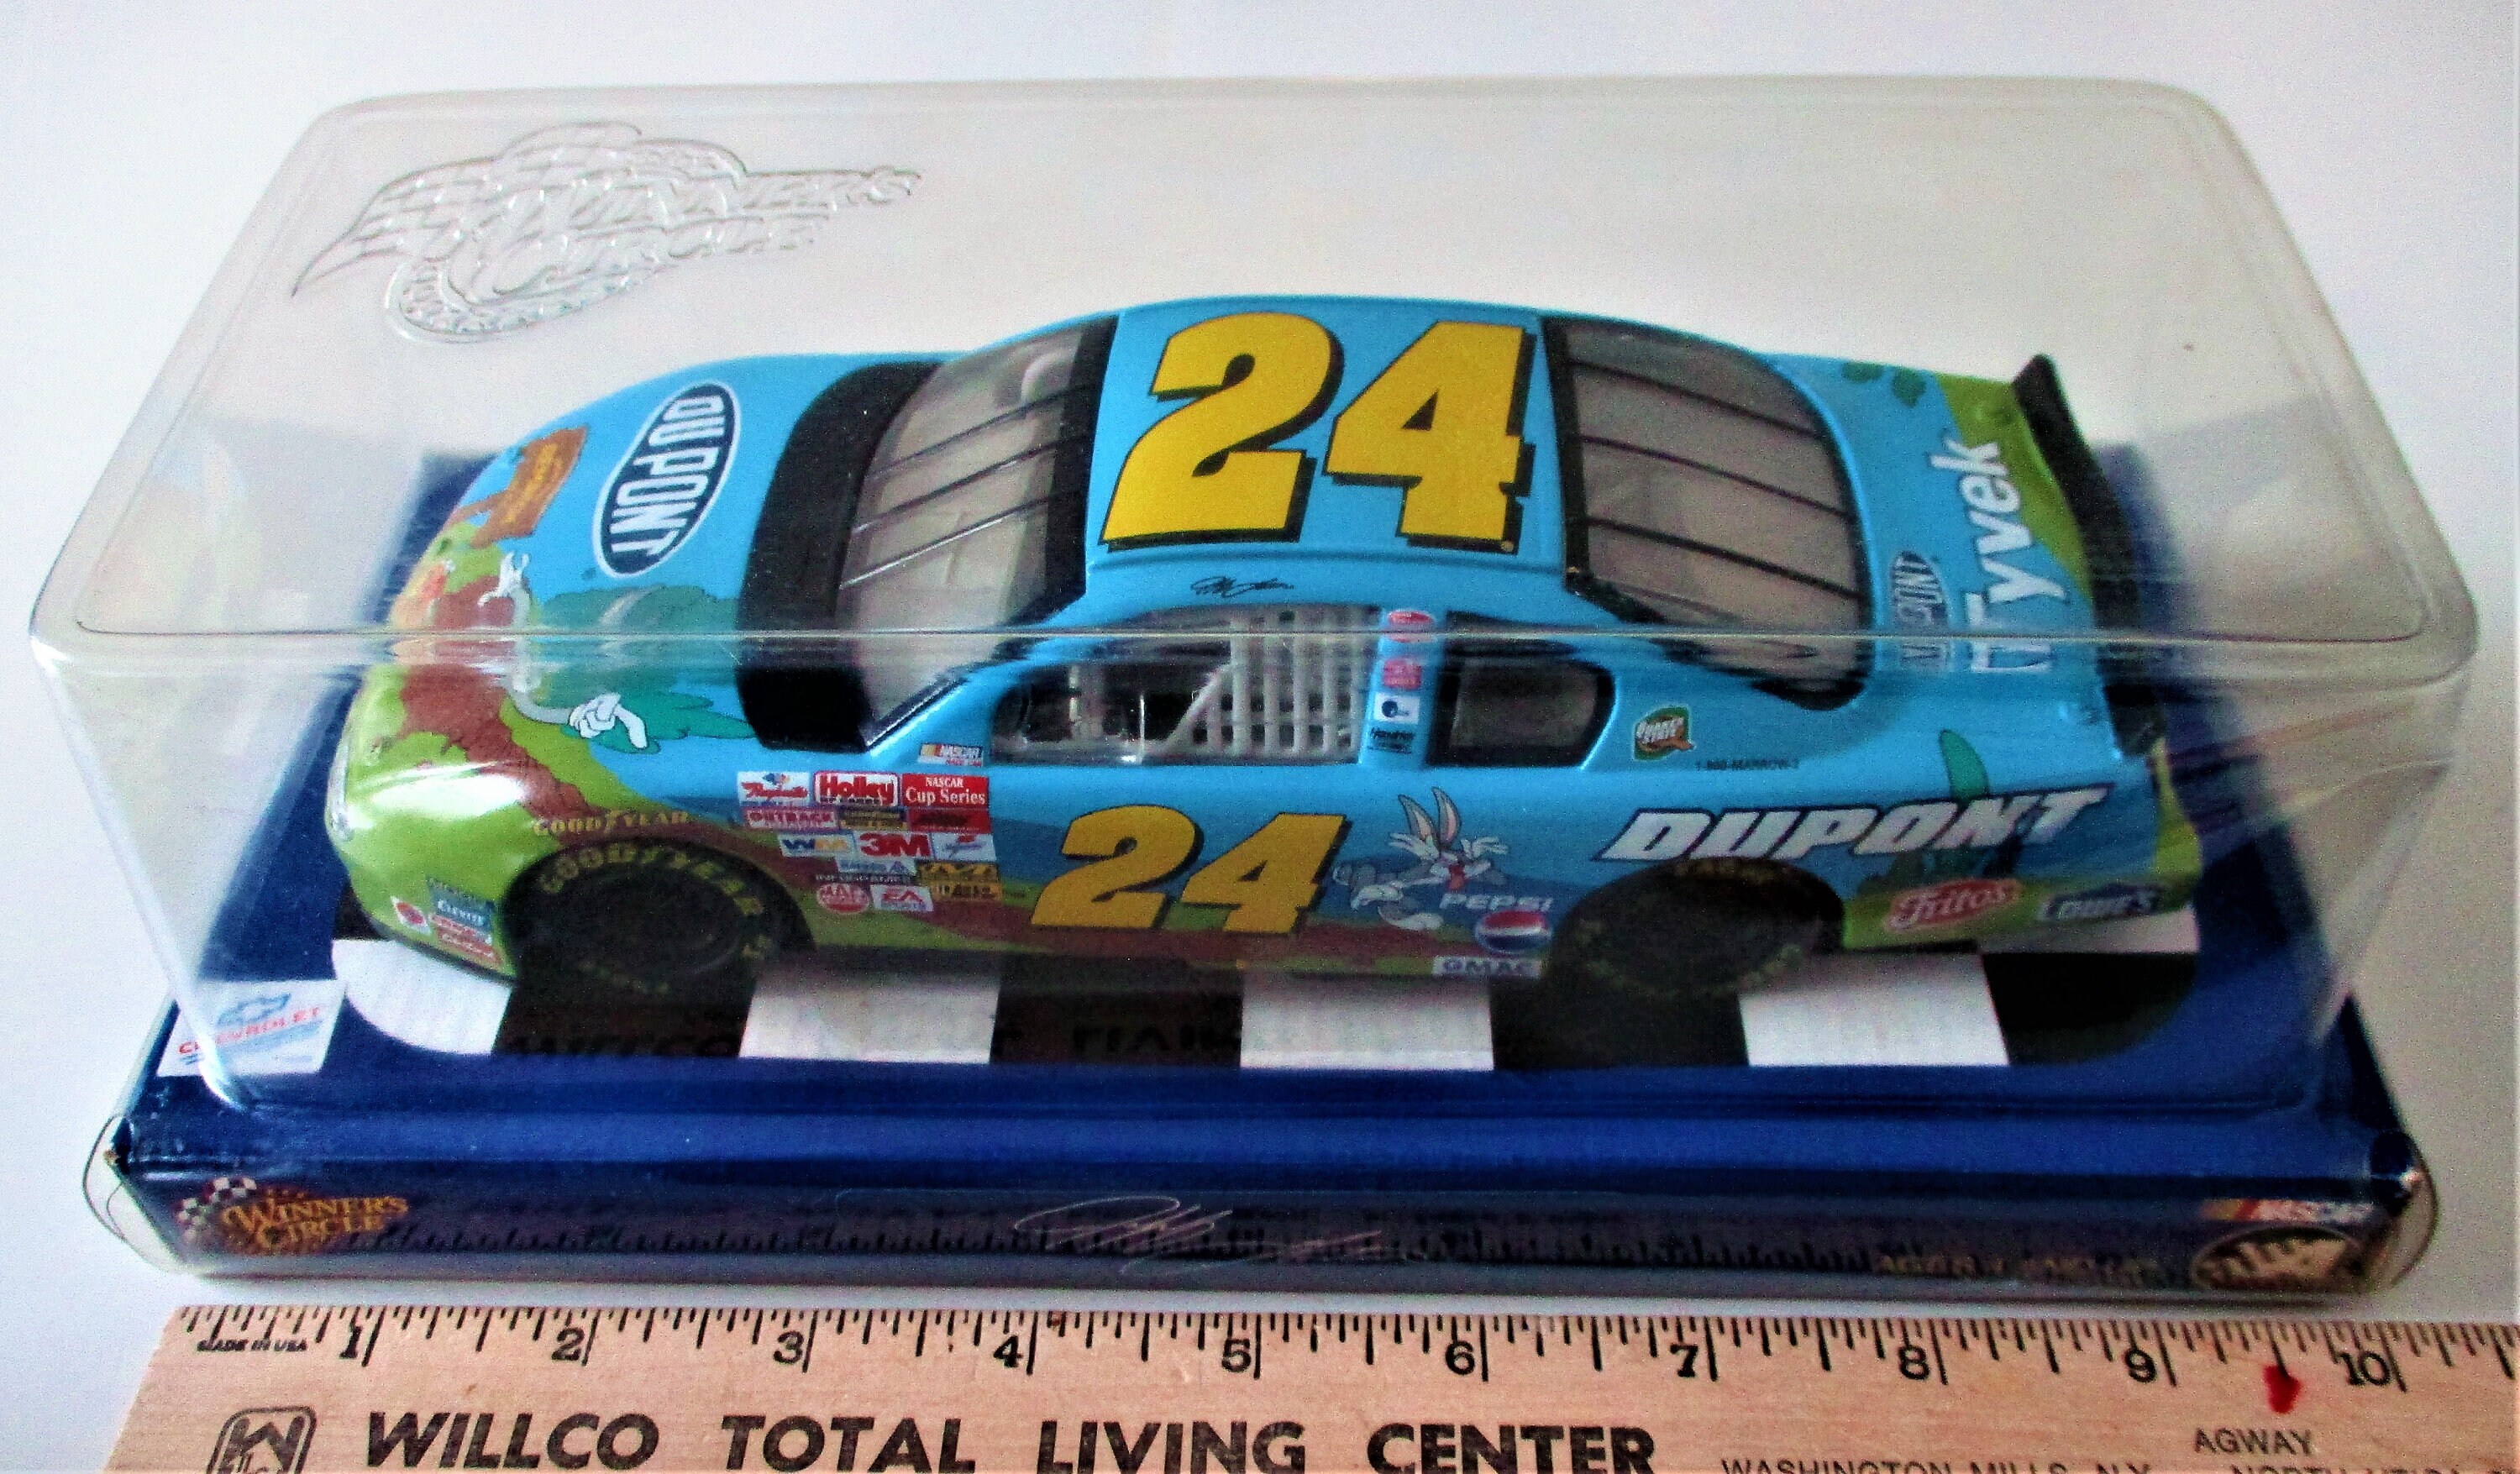 Jeff Gordon 2003 Monte Carlo 1 24 Scale #24 Dupont Looney Tunes by Action for sale online 